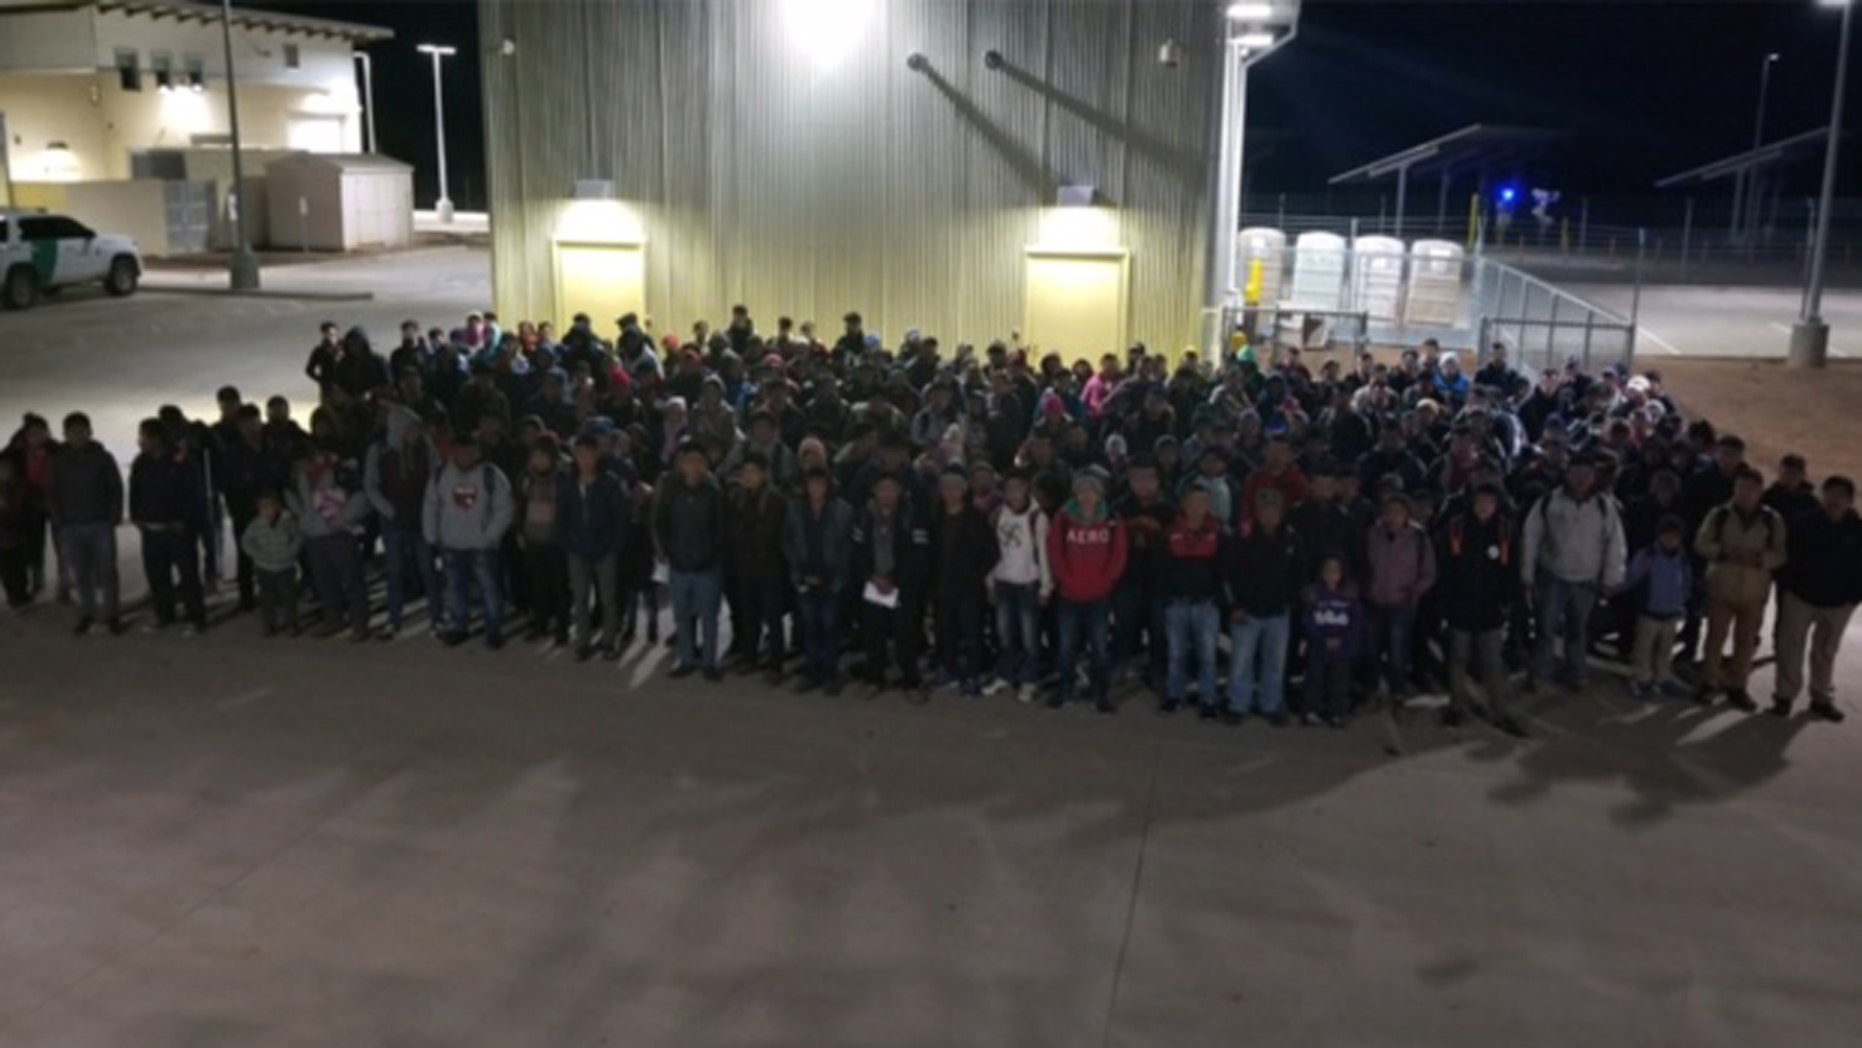 United States Border Patrol agents in New Mexico encountering a large group of immigrants.